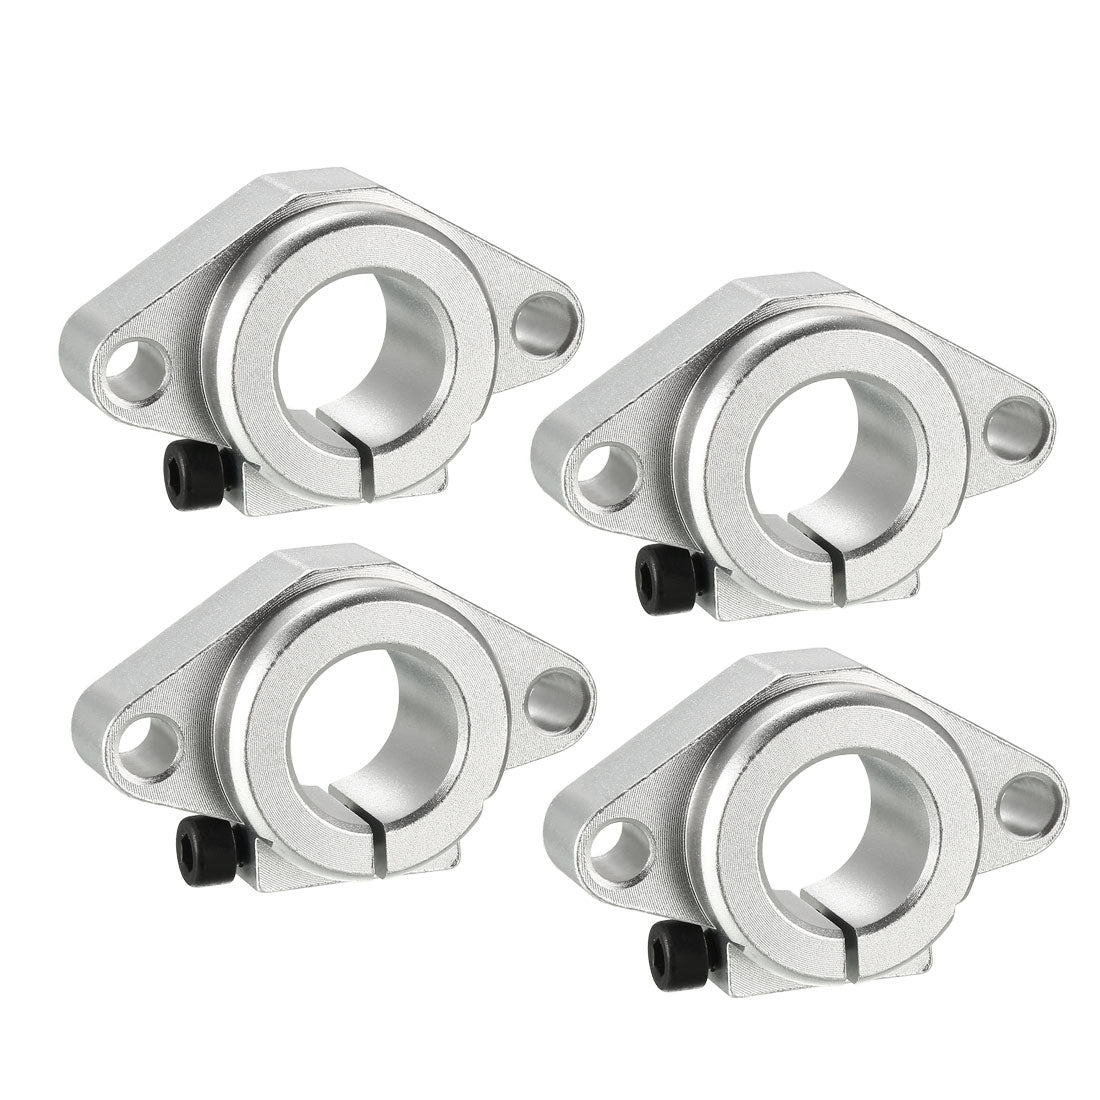 uxcell Uxcell 4PCS SHF20 Linear Motion Rail Clamping Rod Rail Guide Support for 20mm Dia Shaft